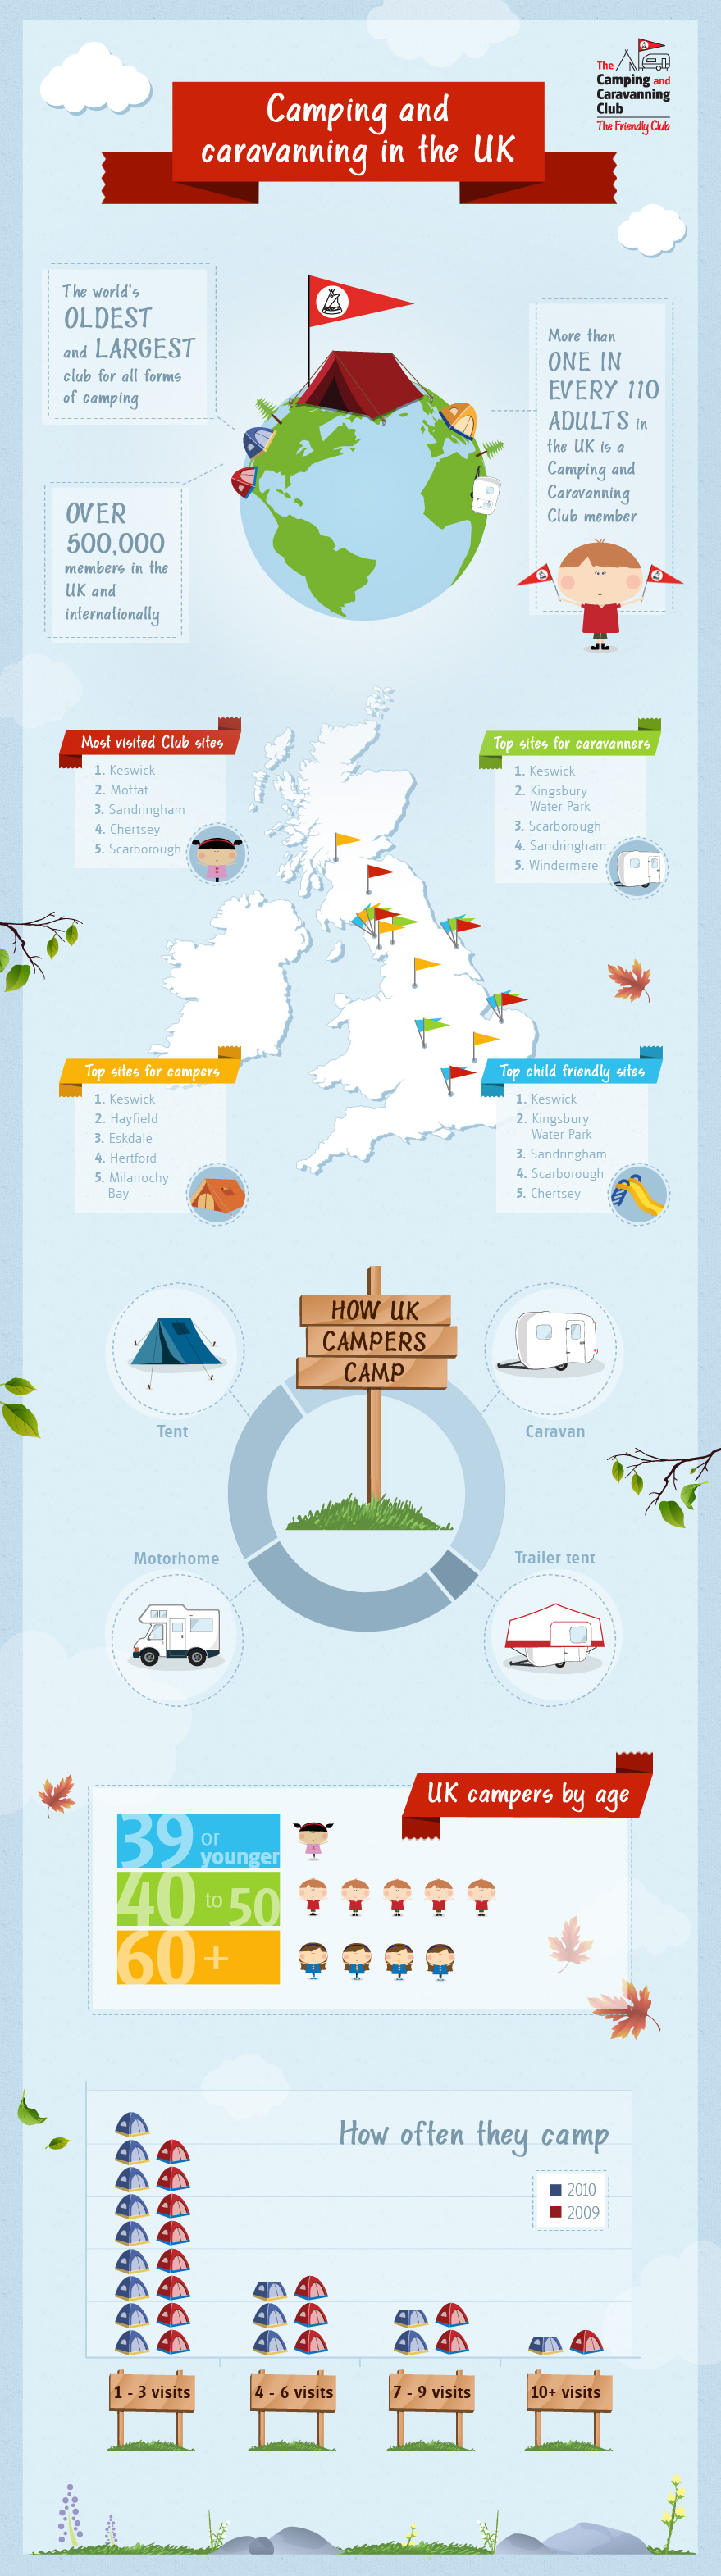 Camping and caravanning in the UK